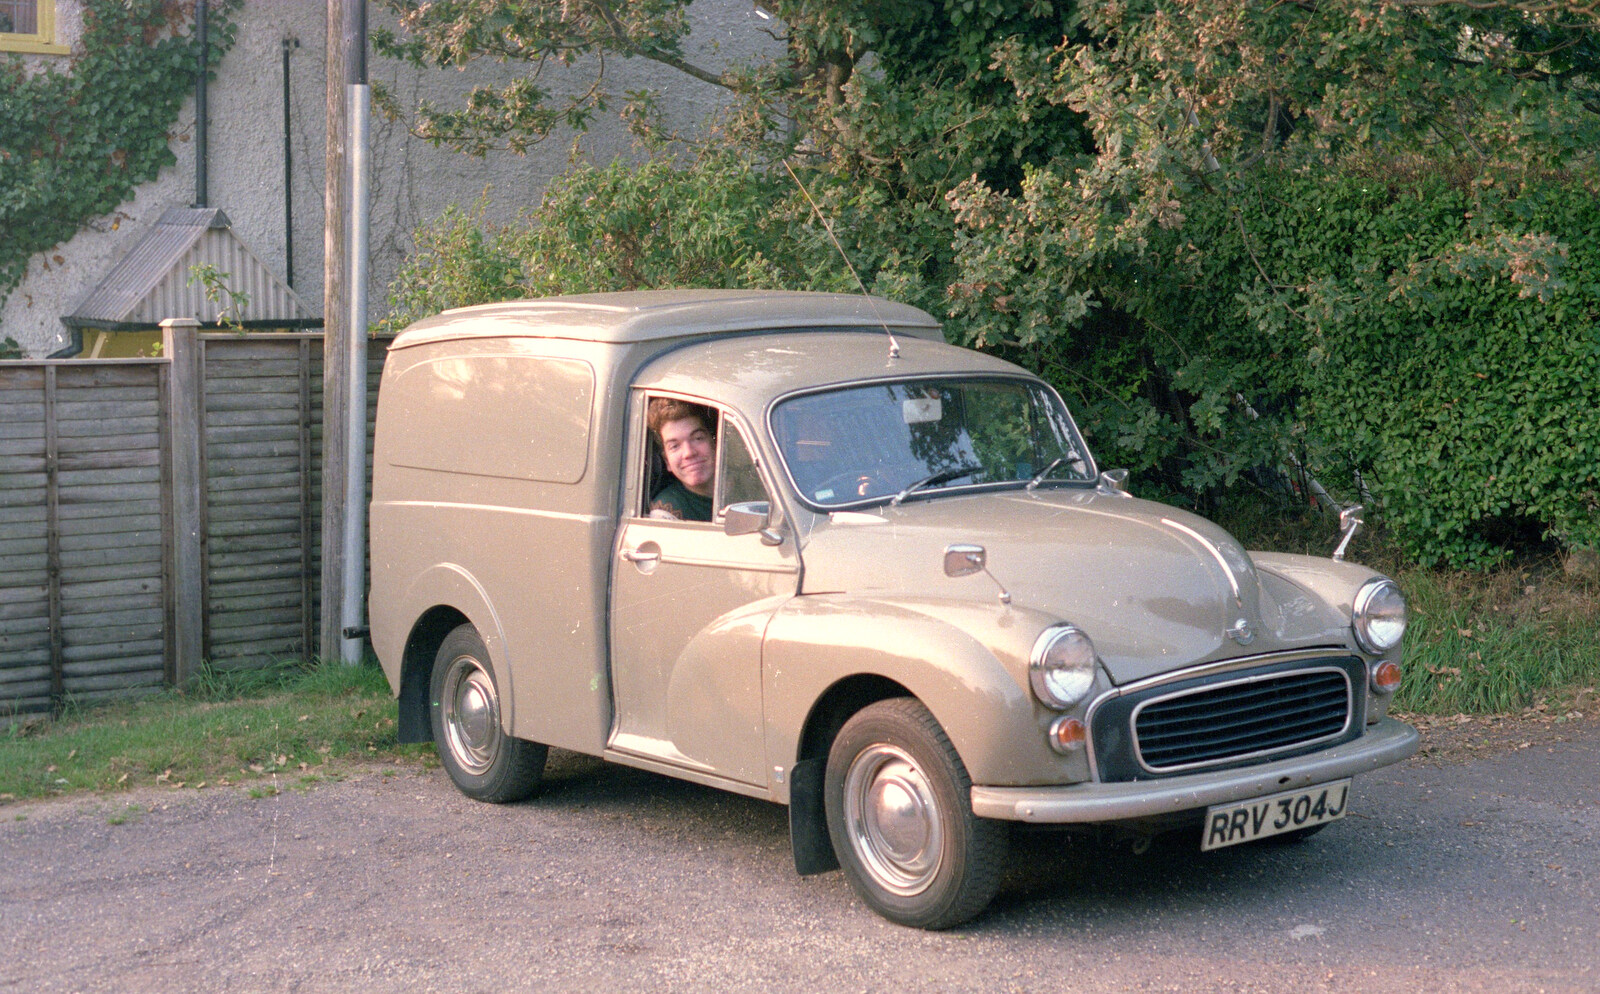 Jon's lovely little Morris Minor van outside Ford Cottage from The Last Day of Term, and Leaving New Milton, Hampshire - 18th September 1985